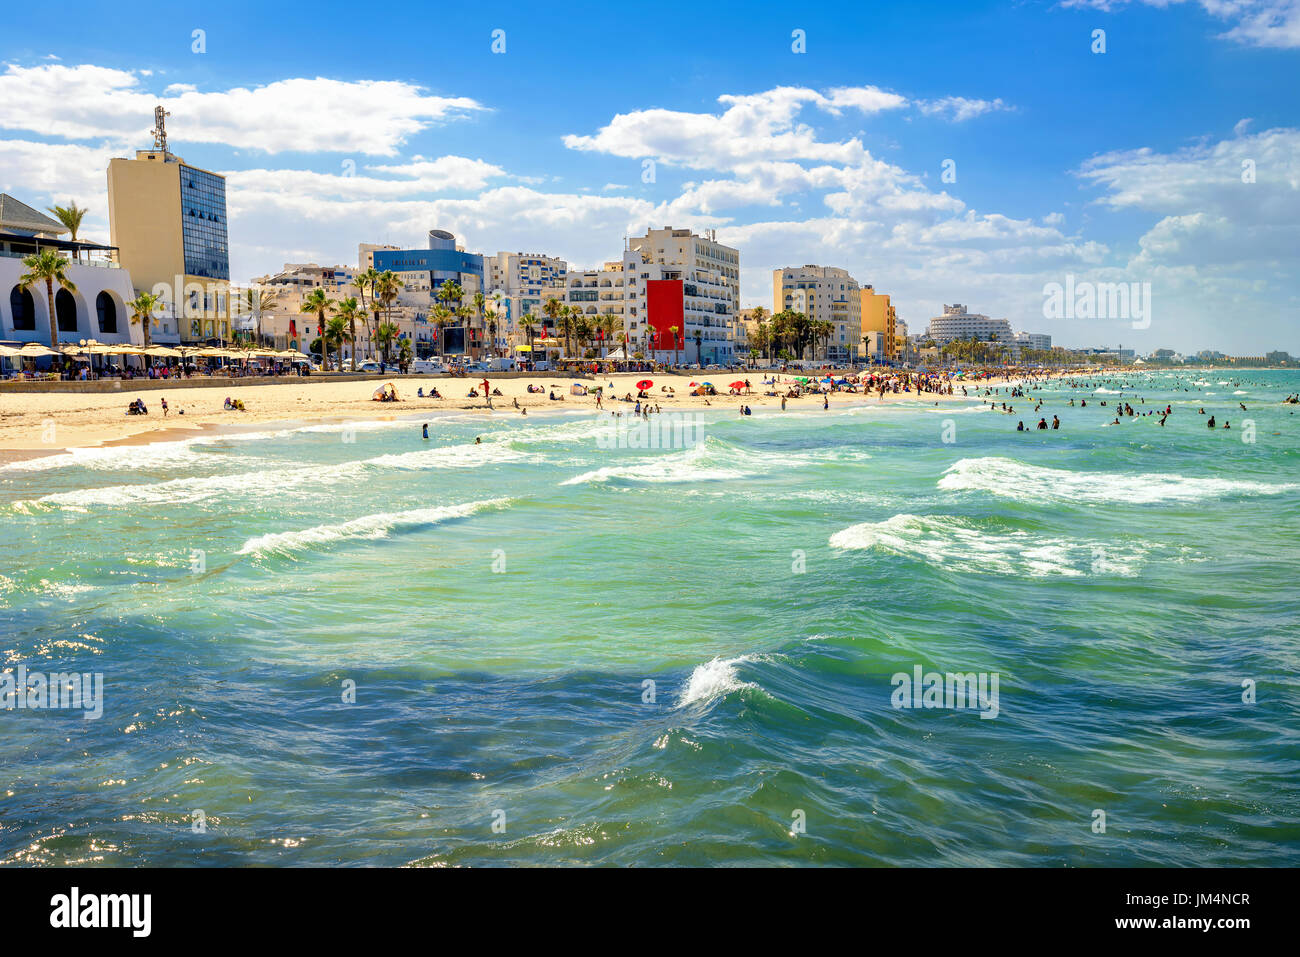 View of urban beach in Sousse. Tunisia, North Africa Stock Photo